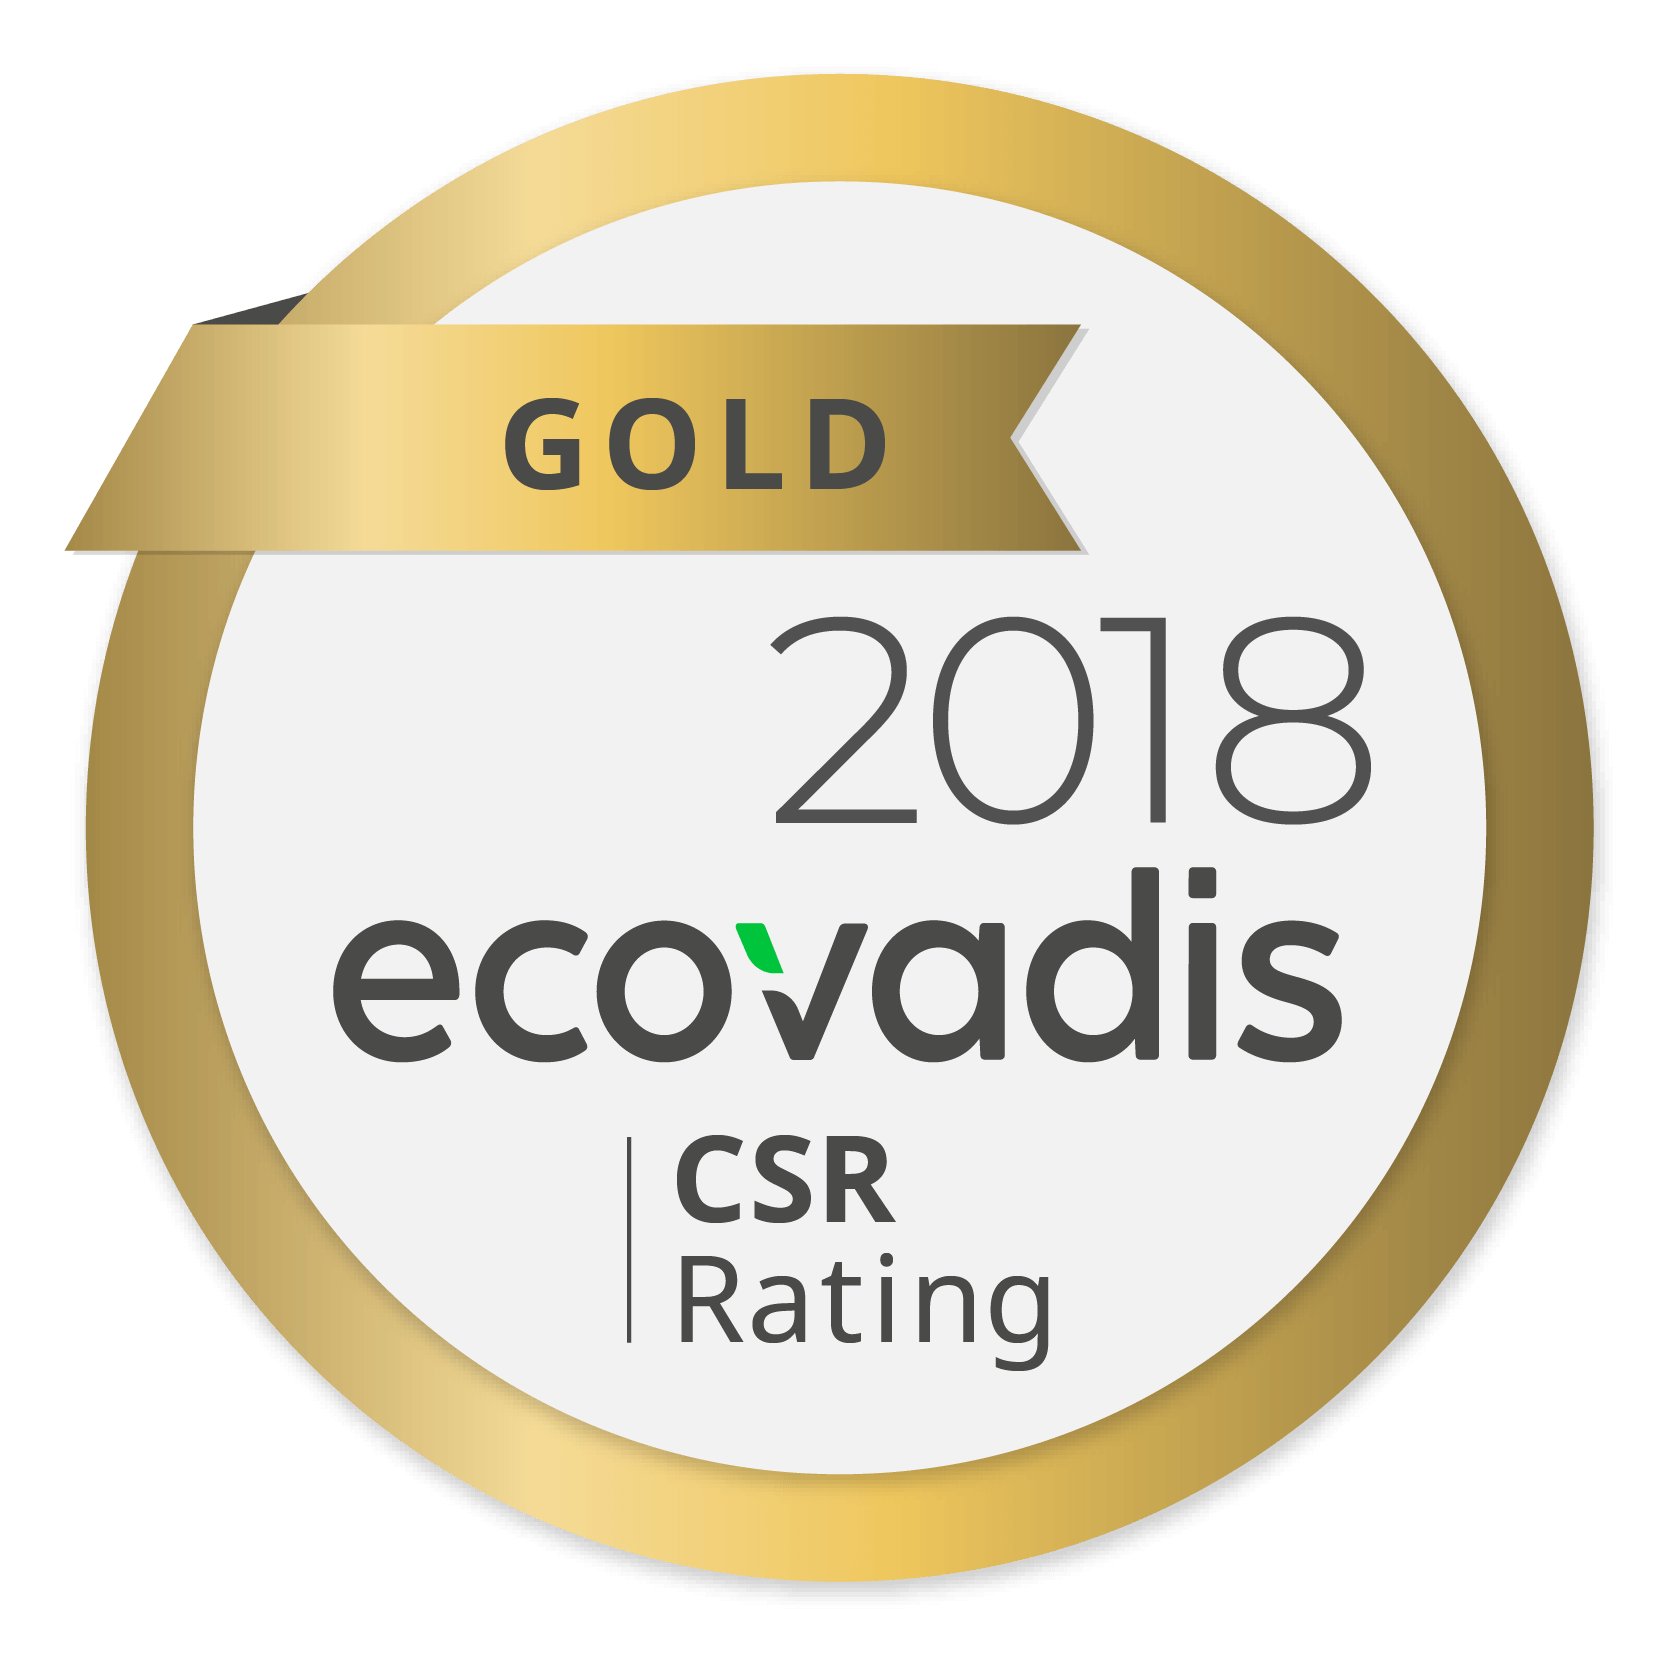 20181115 Ricoh awarded highest gold rating in EcoVadis global supplier survey for fourth year running